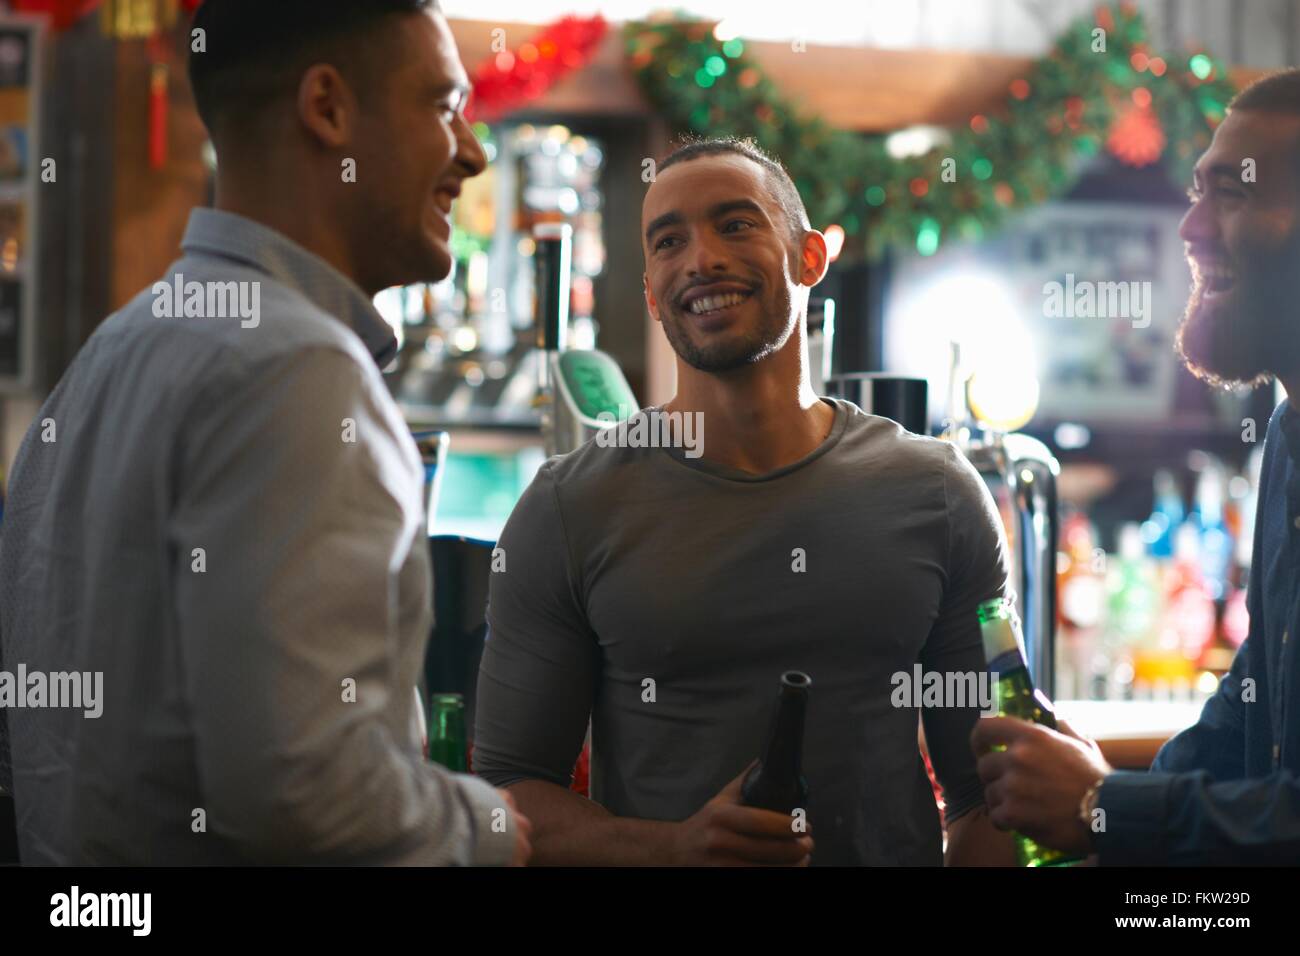 Young man in public house holding beer bottle looking at friend smiling Stock Photo